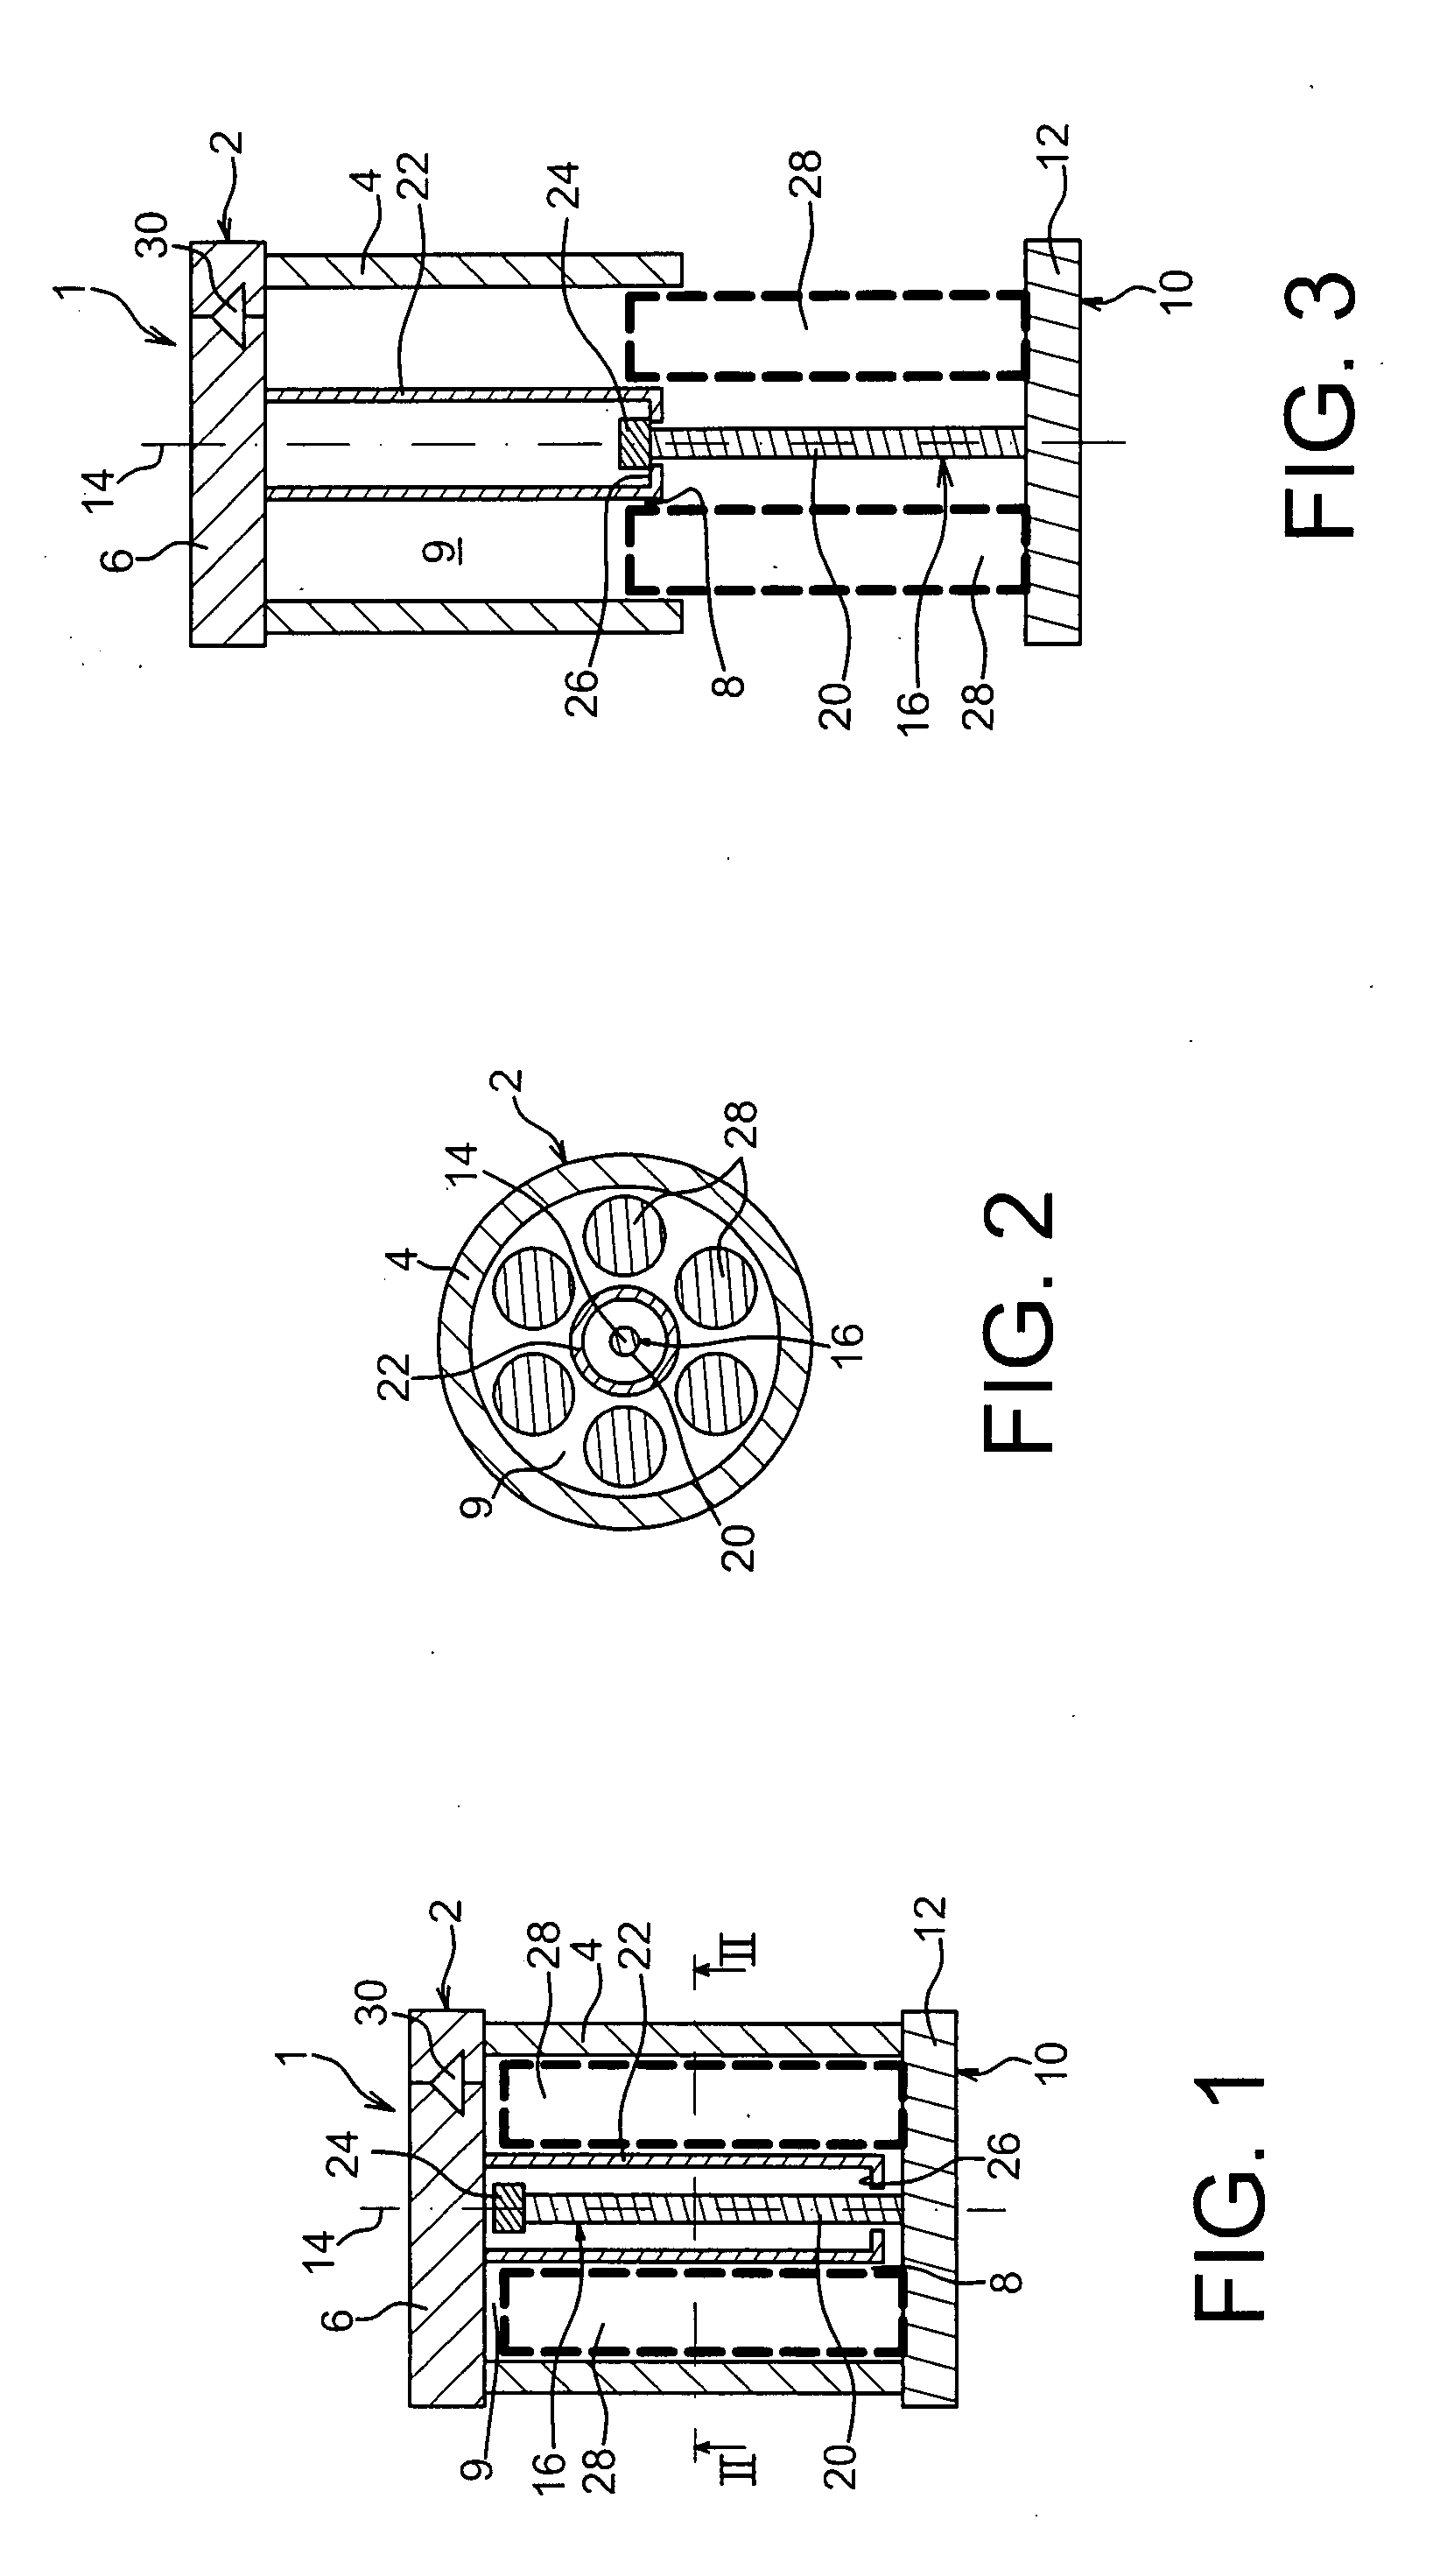 Device for Cleaning and/or Securing a Safe Containment Defined in a Device for Transporting and/or Storing Radioactive Materials